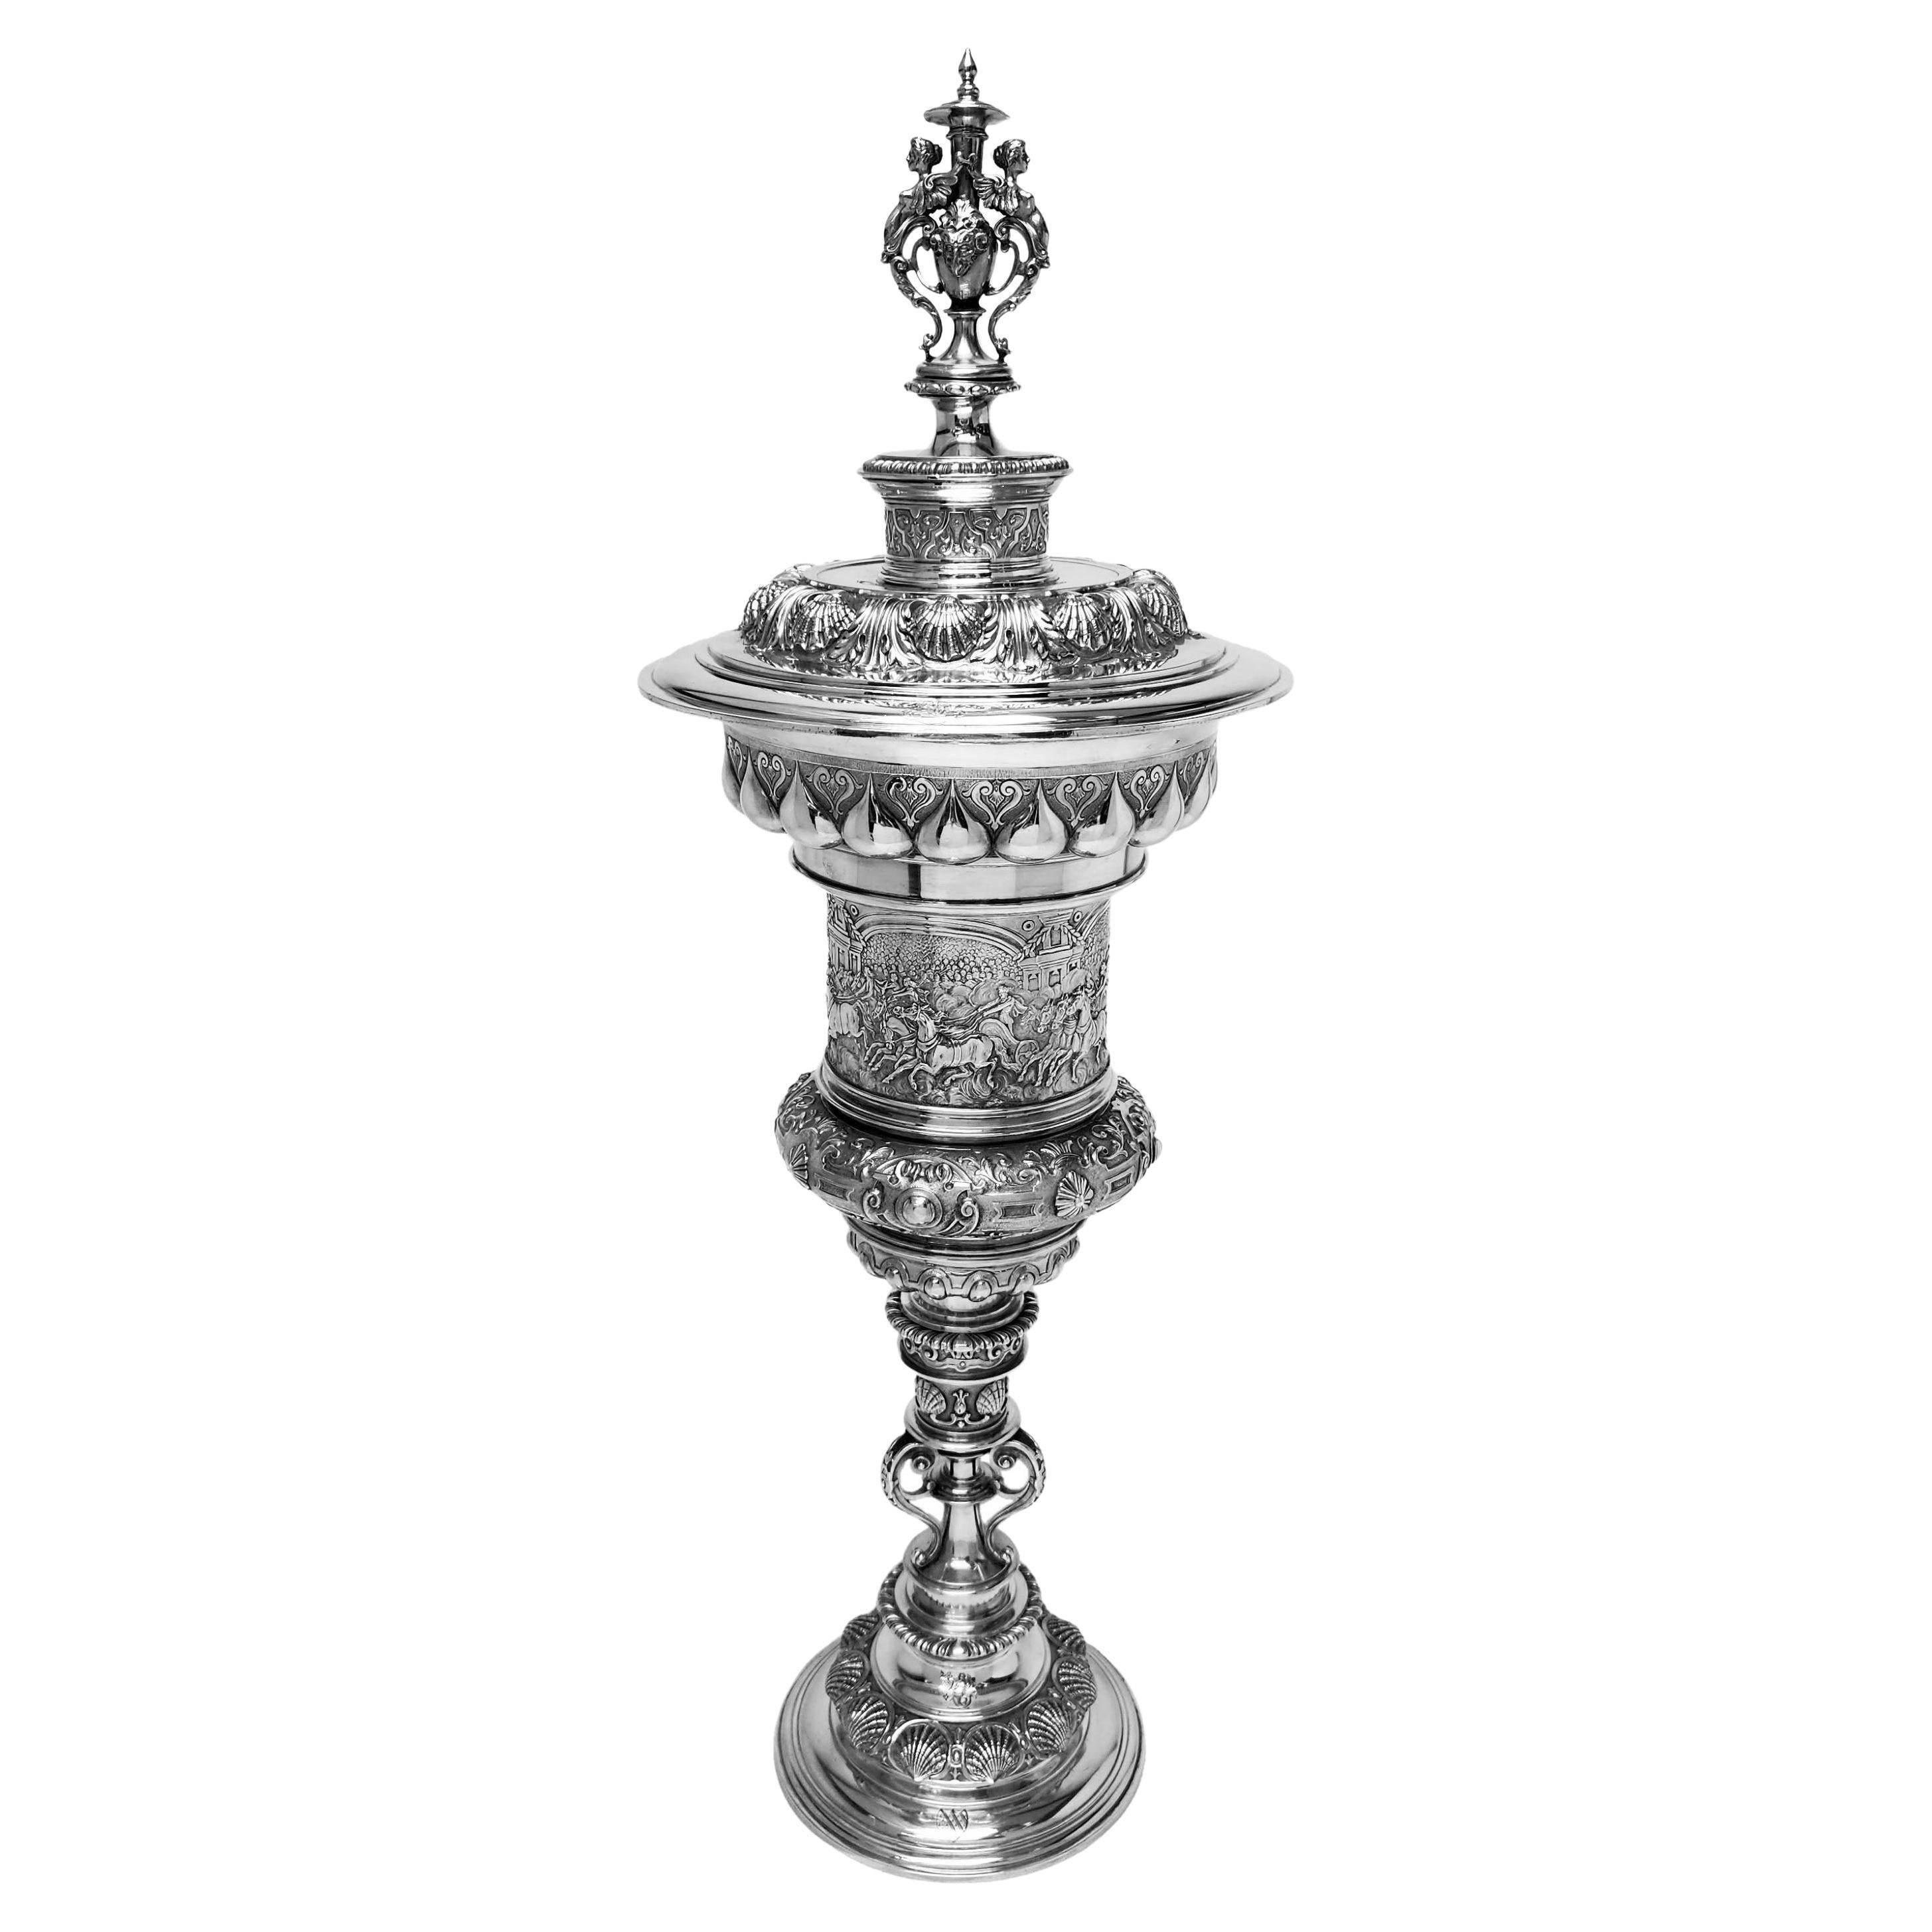 Antique Silver Steeple Cup Lidded Cup & Cover 1902 17th Century Style  For Sale